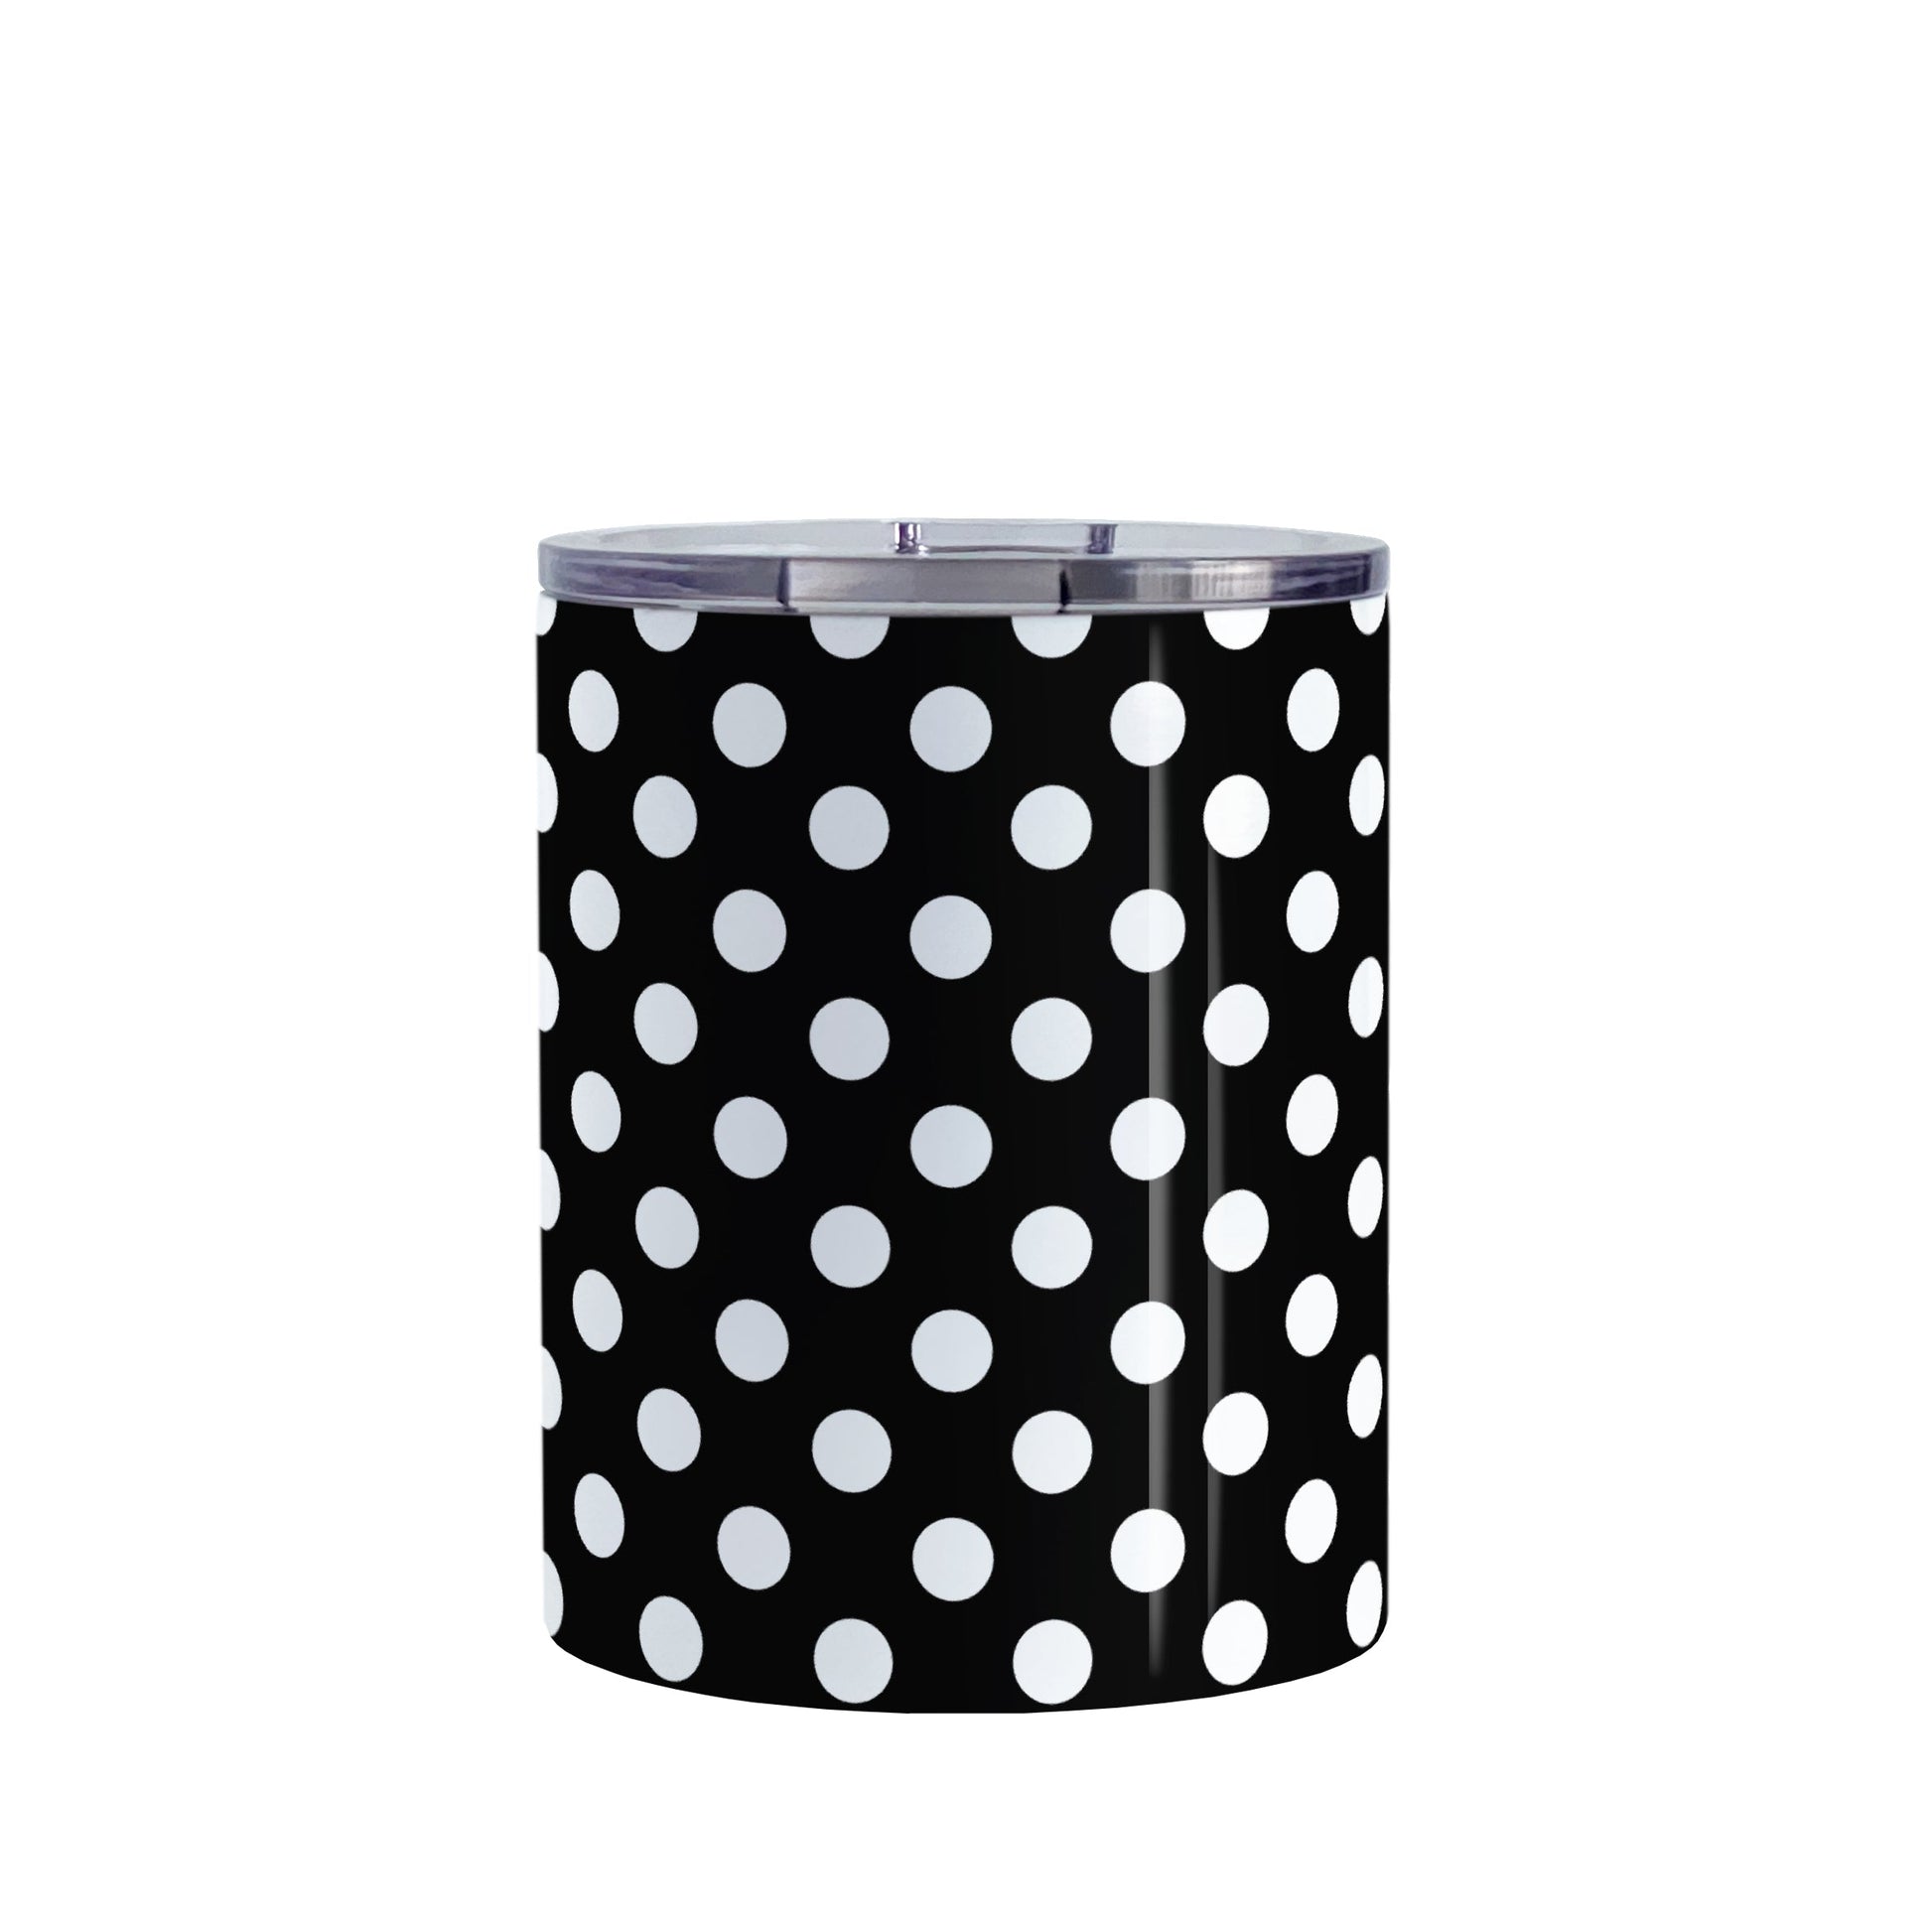 Black Polka Dot Tumbler Cup (10oz, stainless steel insulated) at Amy's Coffee Mugs